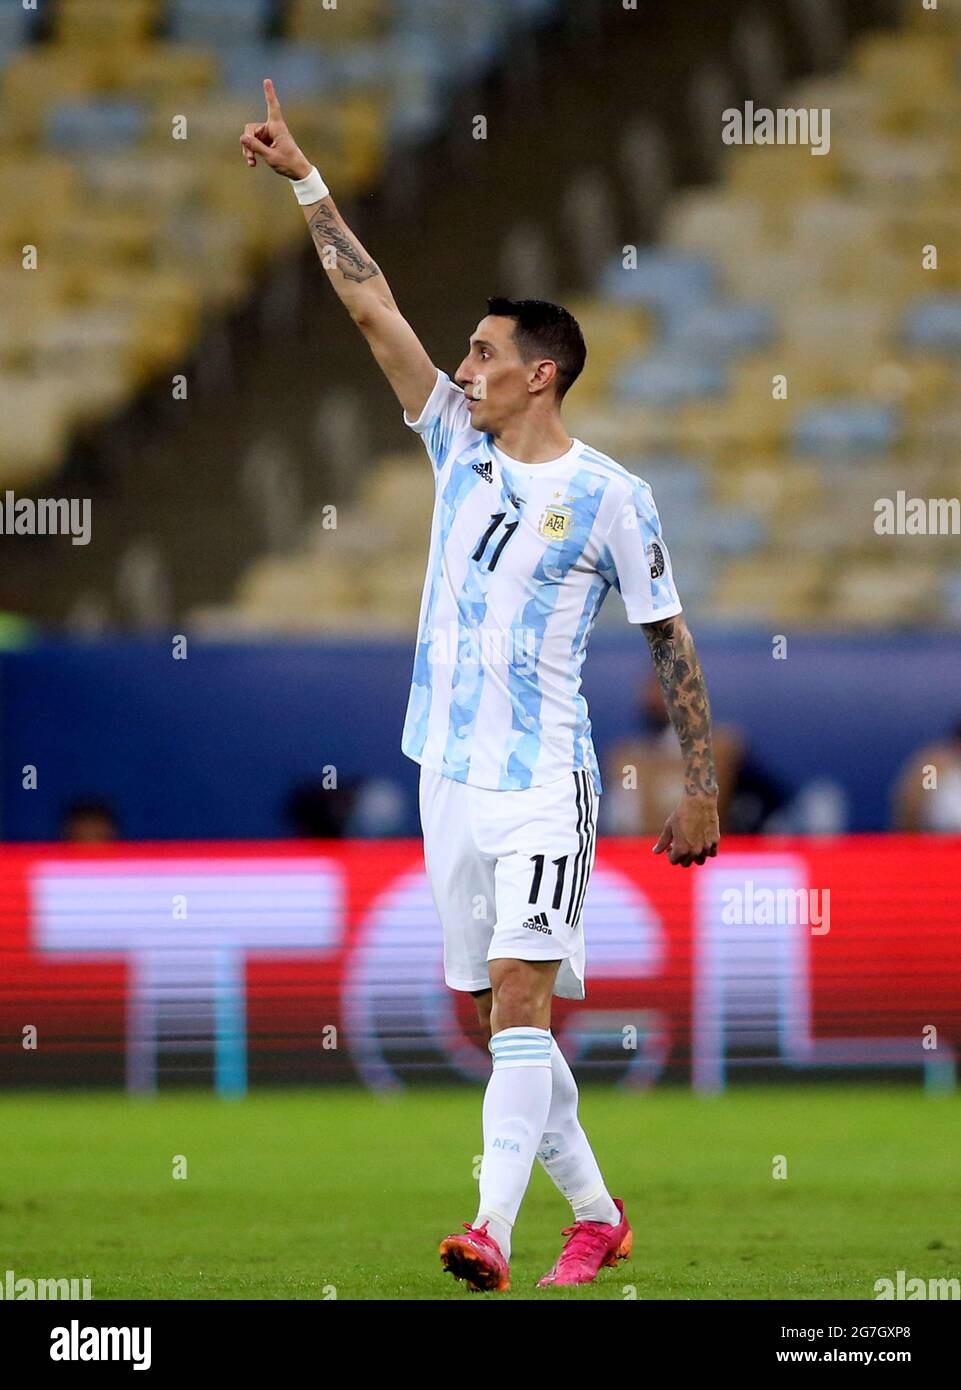 RIO DE JANEIRO, BRAZIL - JULY 10: Angel Di Maria of Argentina celebrates after scores his Goal ,during the Final Match of Copa America Brazil 2021 between Brazil and Argentina at Maracana Stadium on July 10, 2021 in Rio de Janeiro, Brazil. (MB Media) Stock Photo